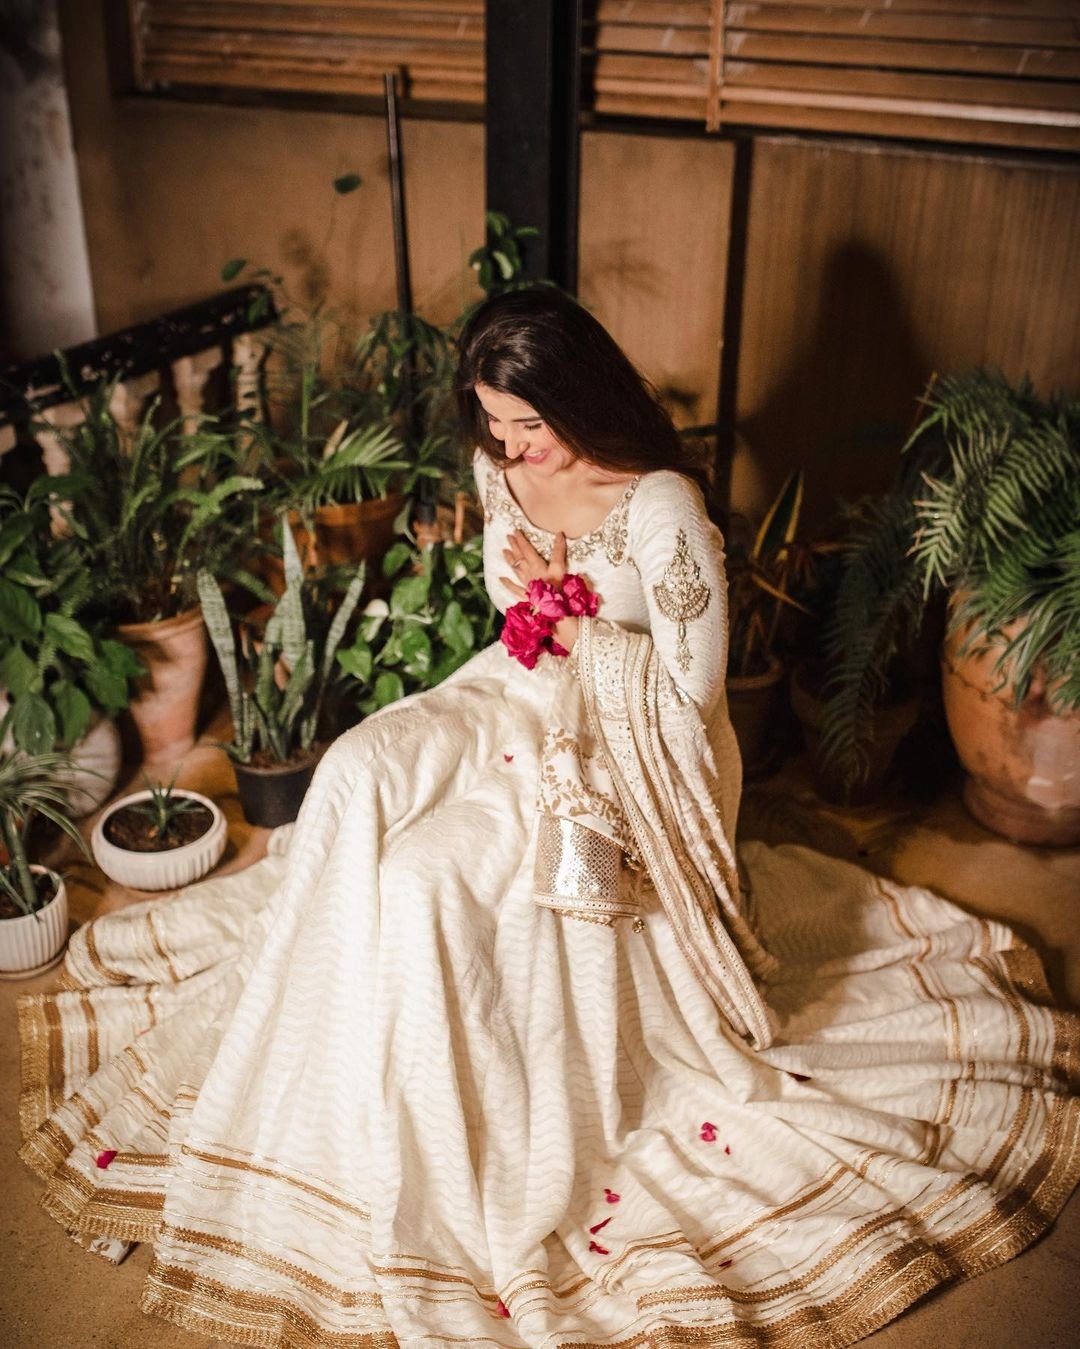 Hareem Farooq Exodus Ethereal Beauty in New pictures